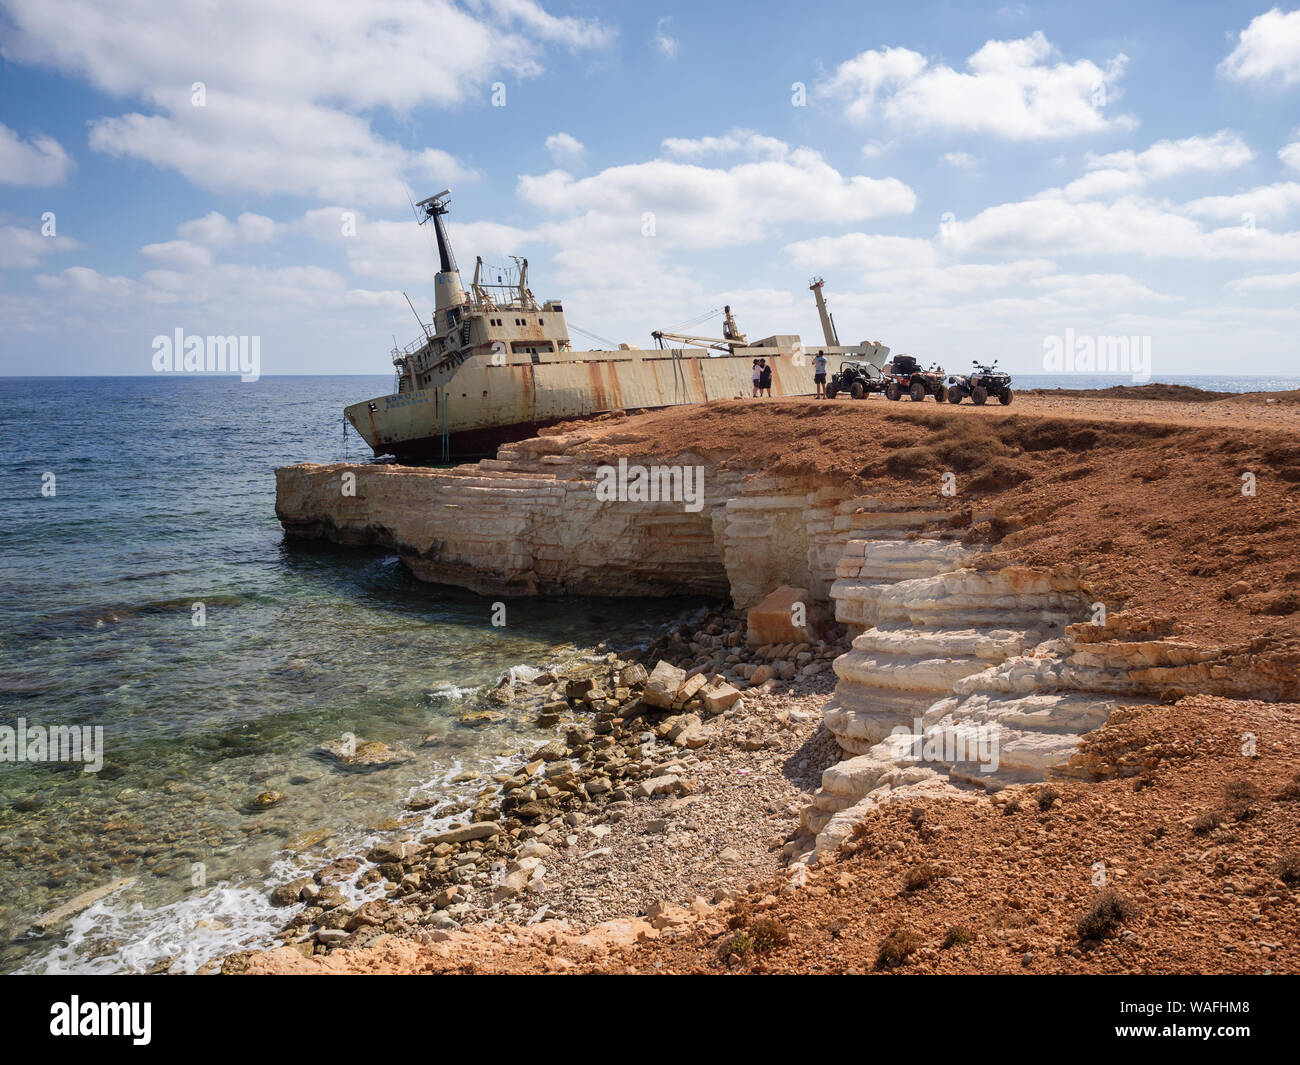 Paphos District, Cyprus - July 15, 2016: Tourists on quad bikes taking pictures near a shipwrecked EDRO III vessel Stock Photo